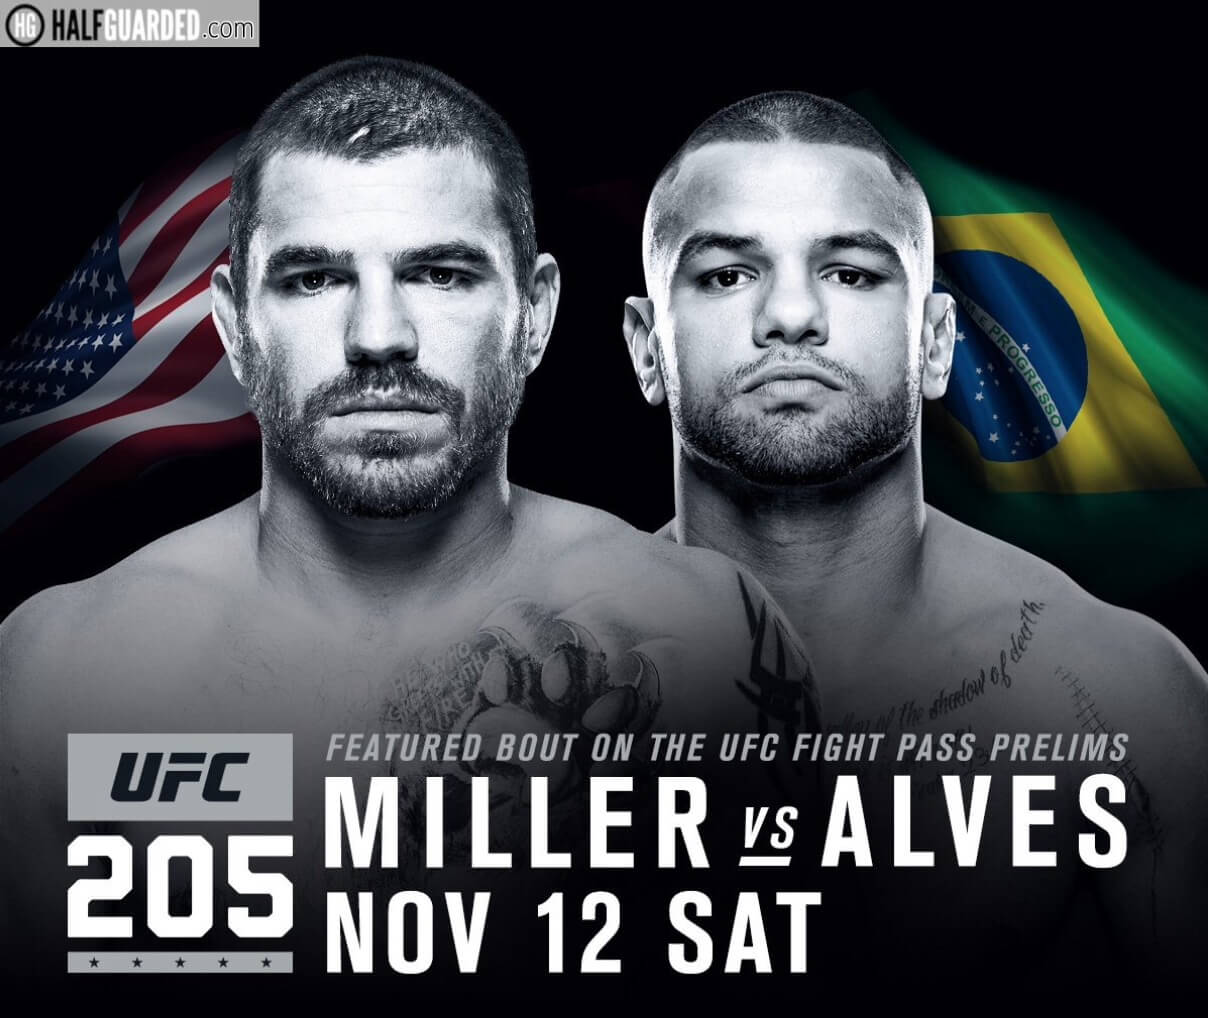 UFC 205 results